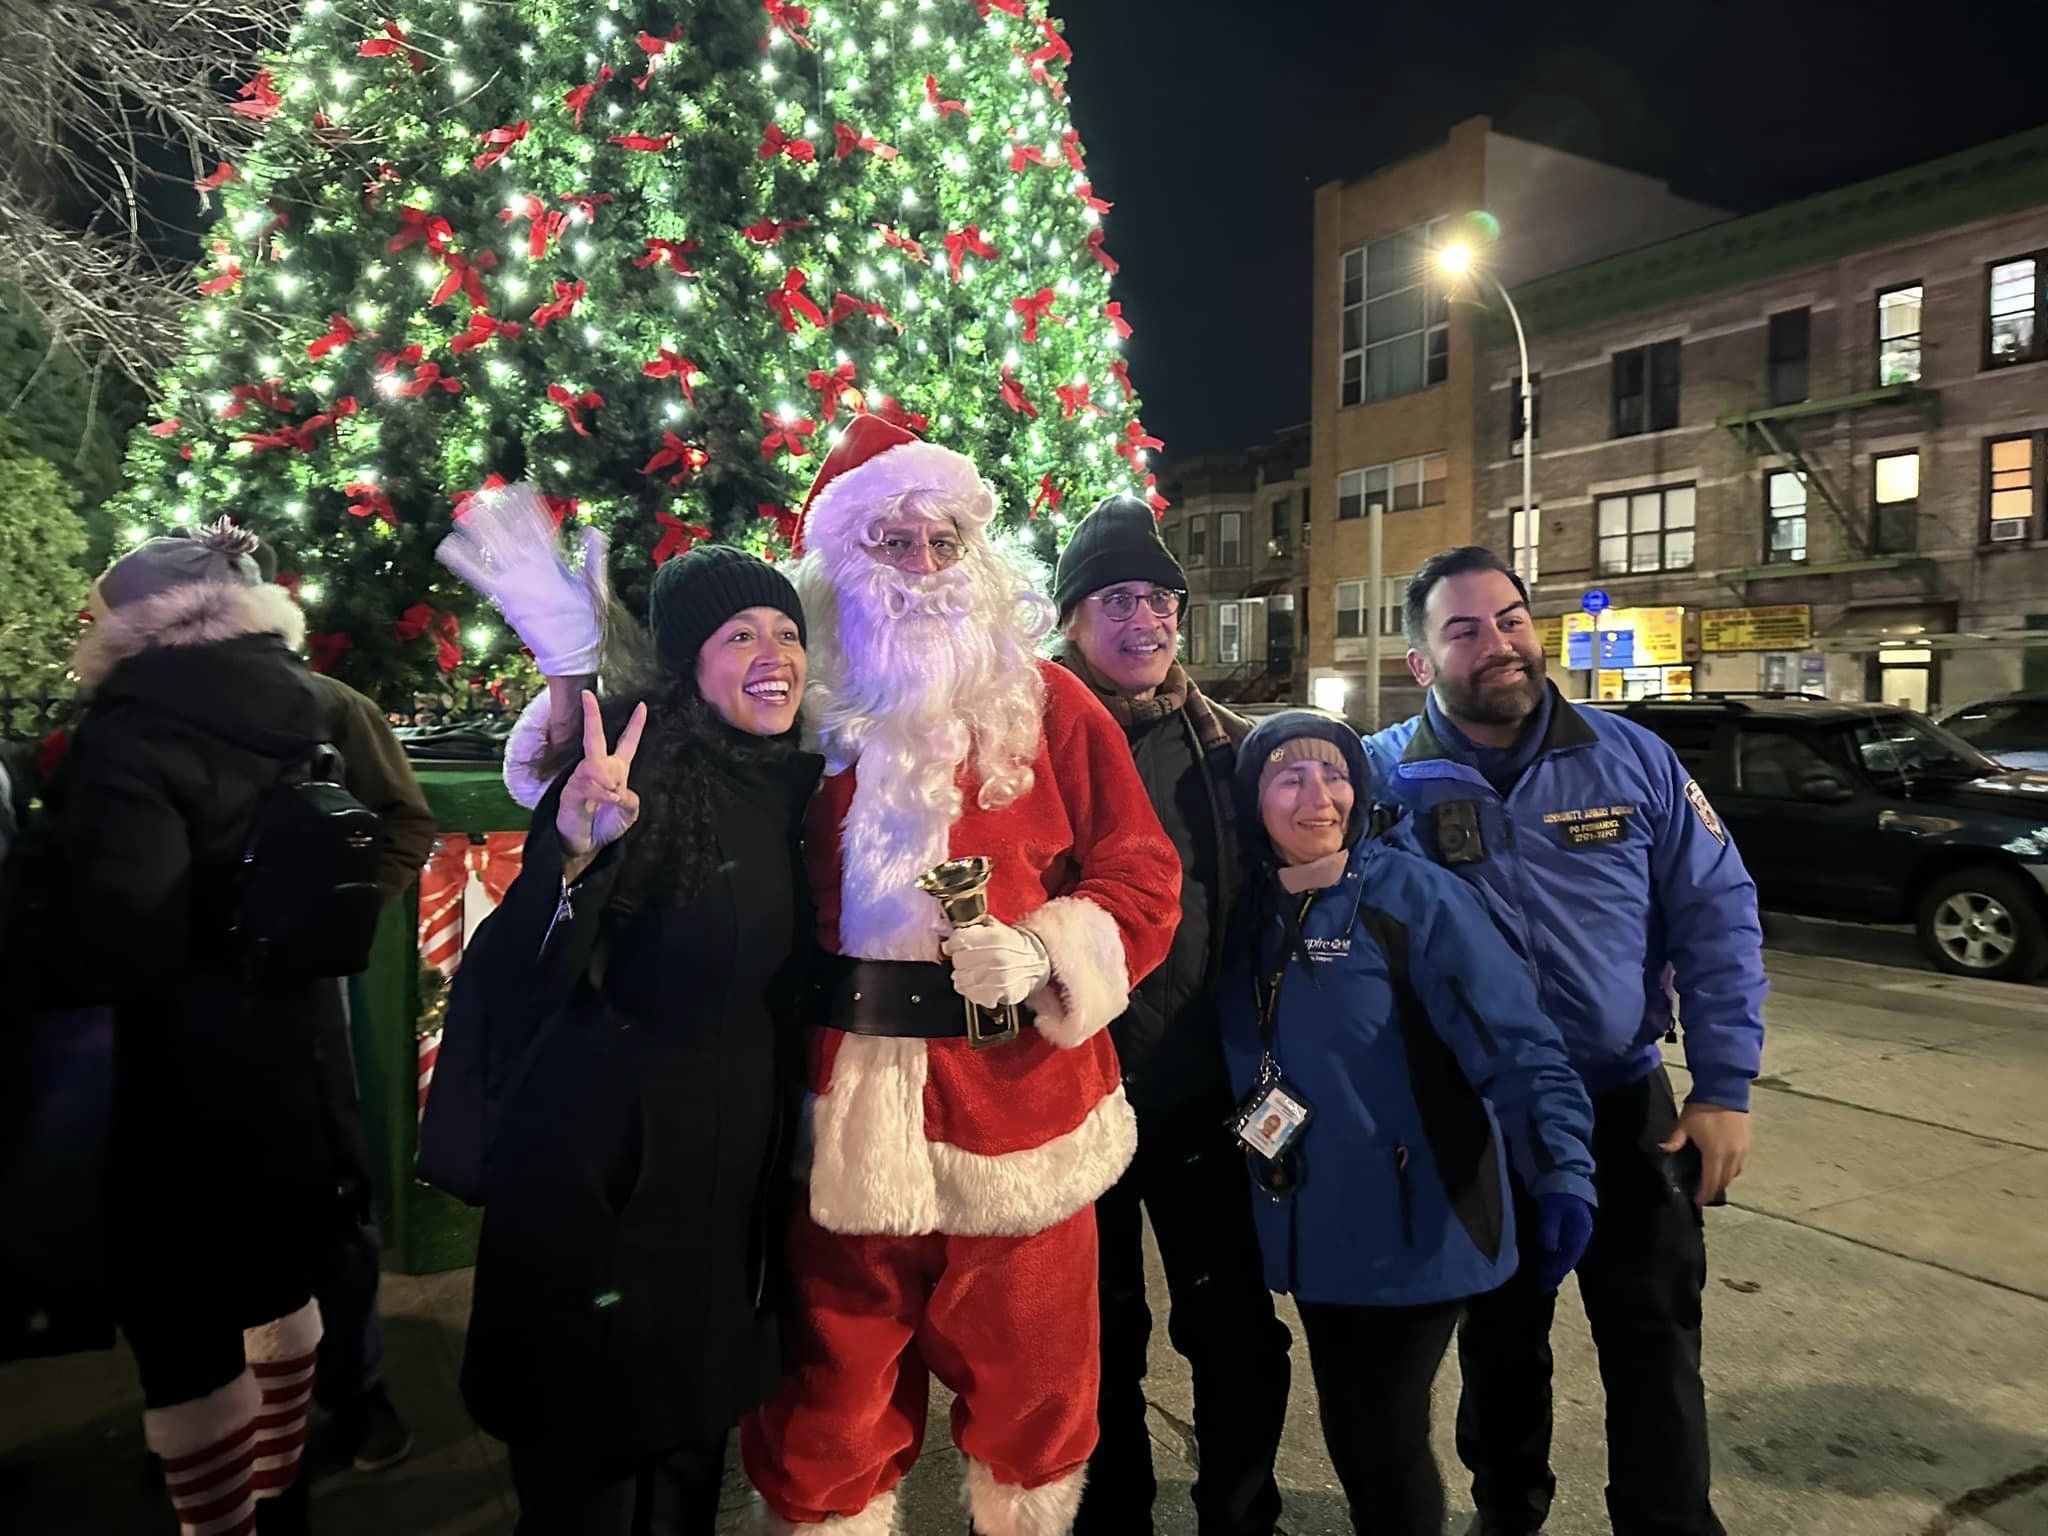 A group of cheerful adults posing with a person dressed as santa claus next to a large, brightly decorated christmas tree outdoors at night.